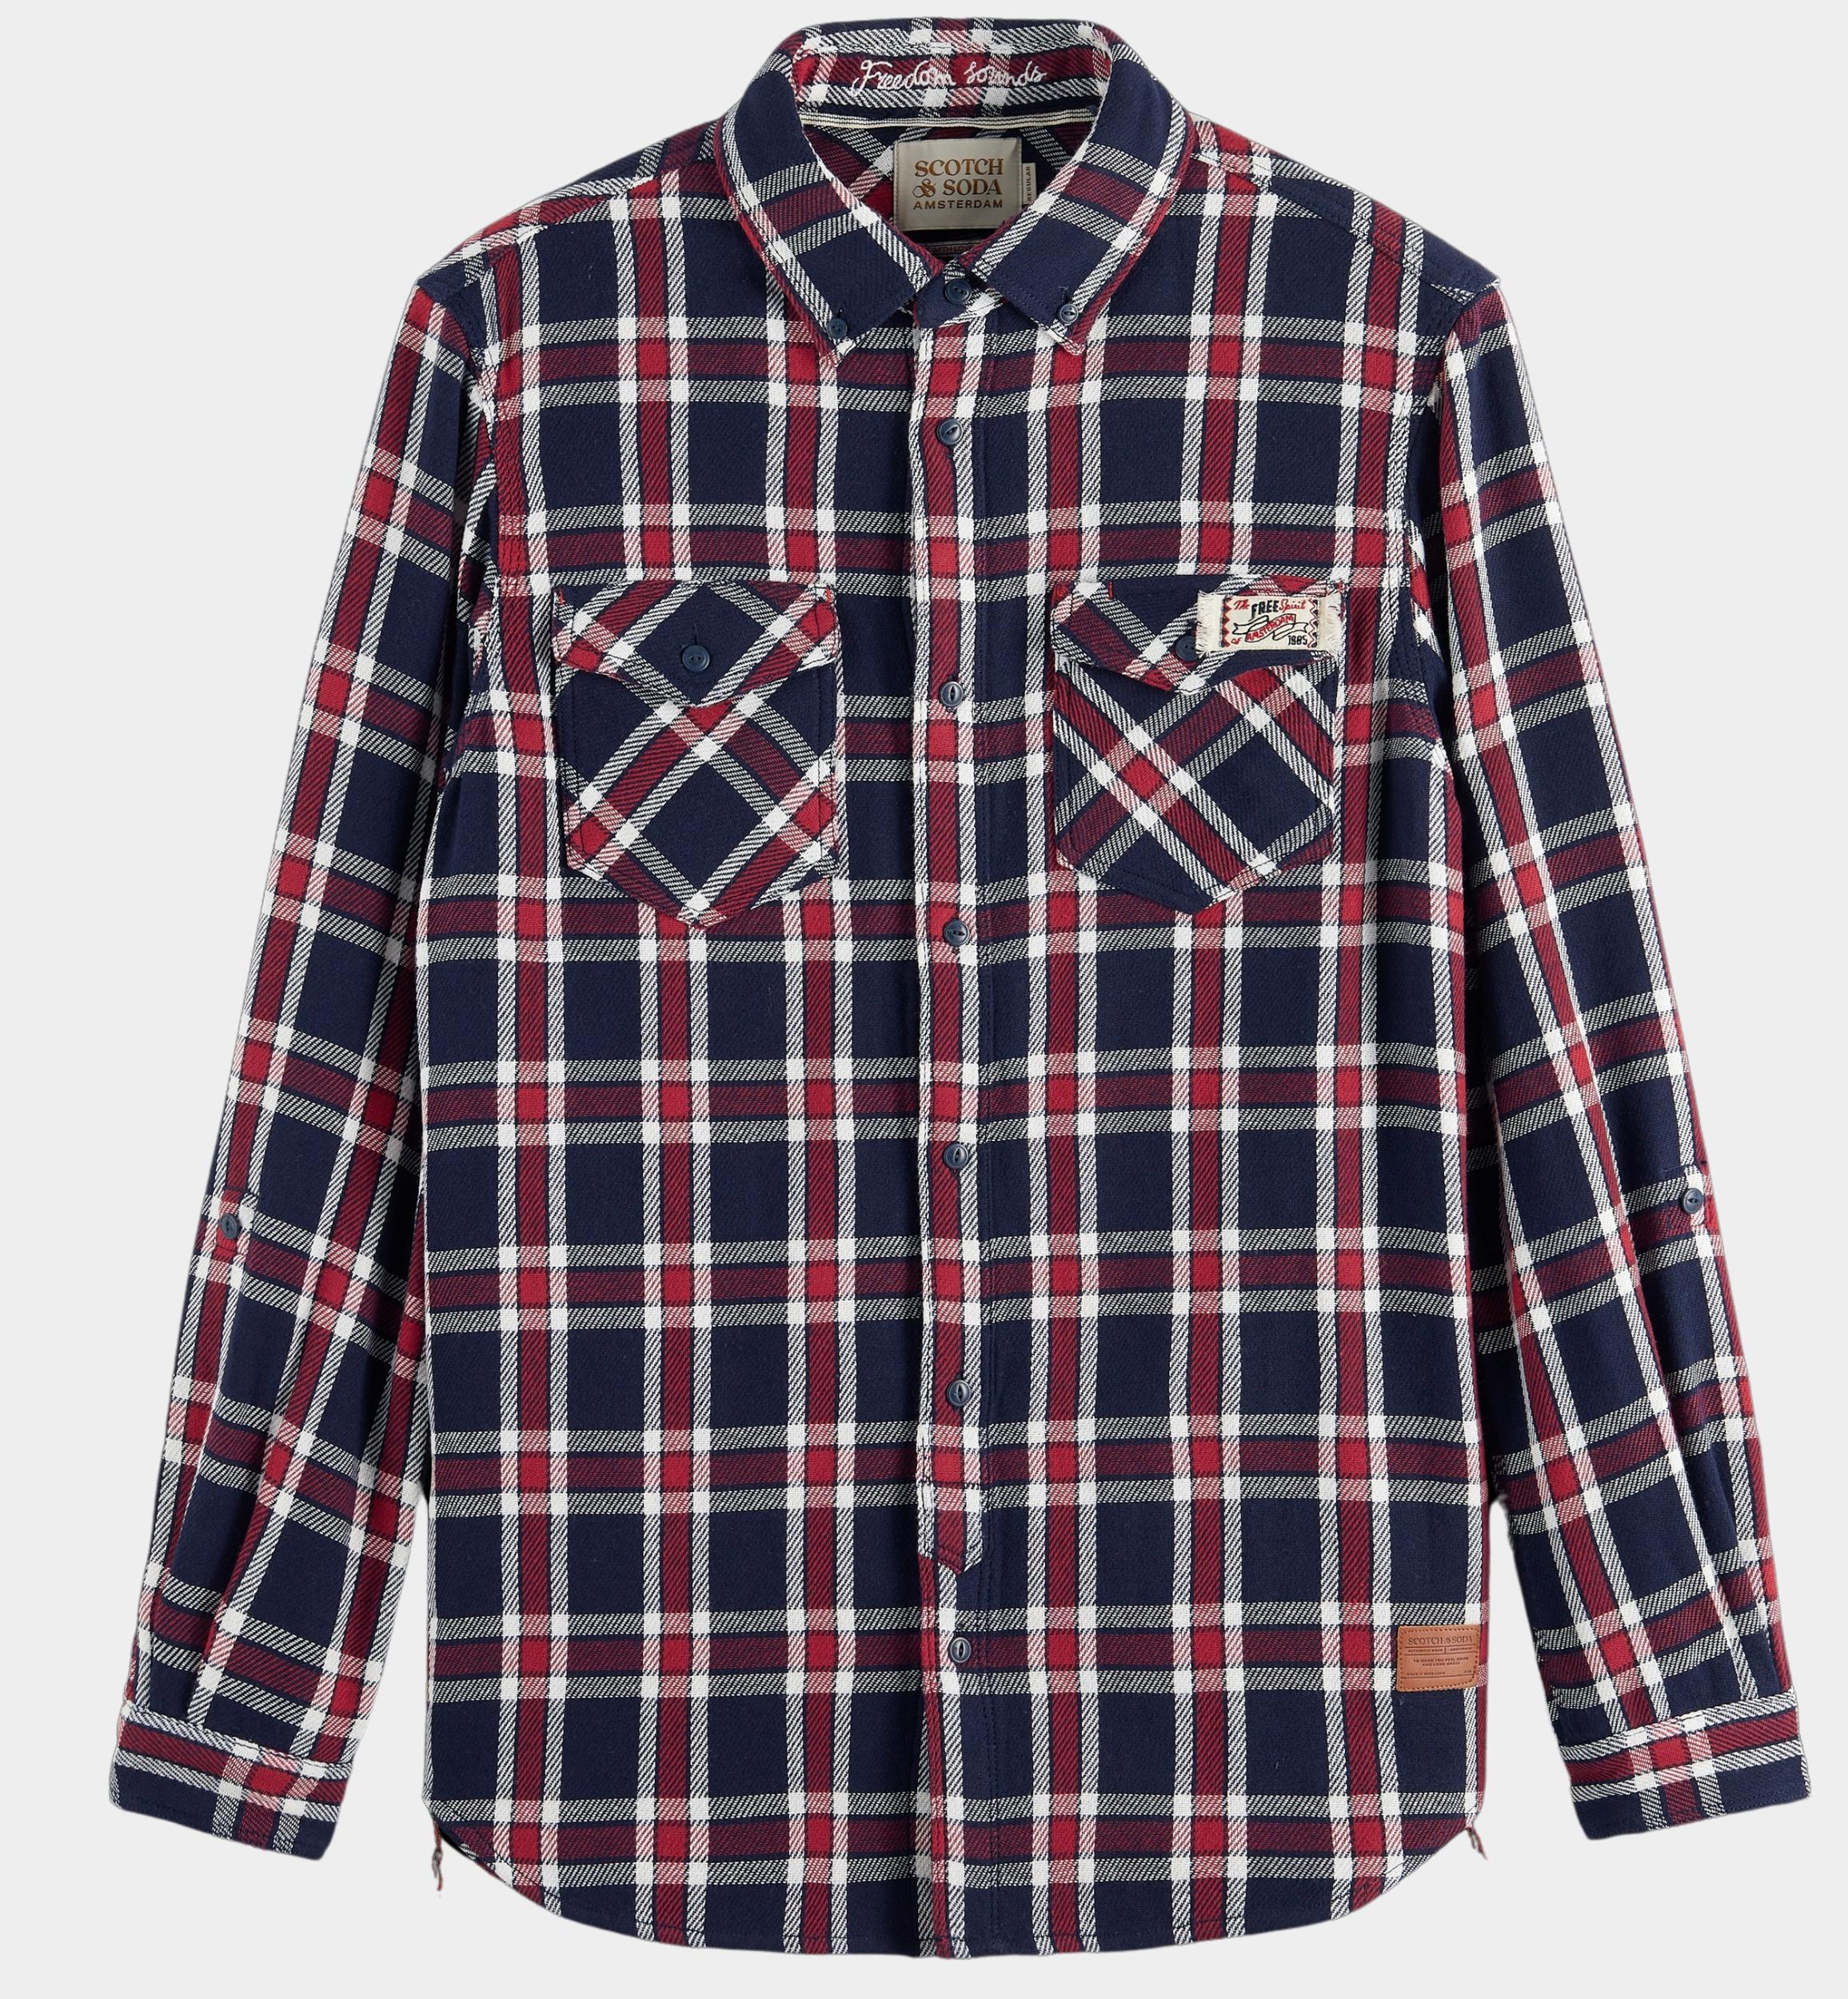 Scotch & Soda Casual hemd lange mouw Rood Archive Double face twill chec 174530/6788